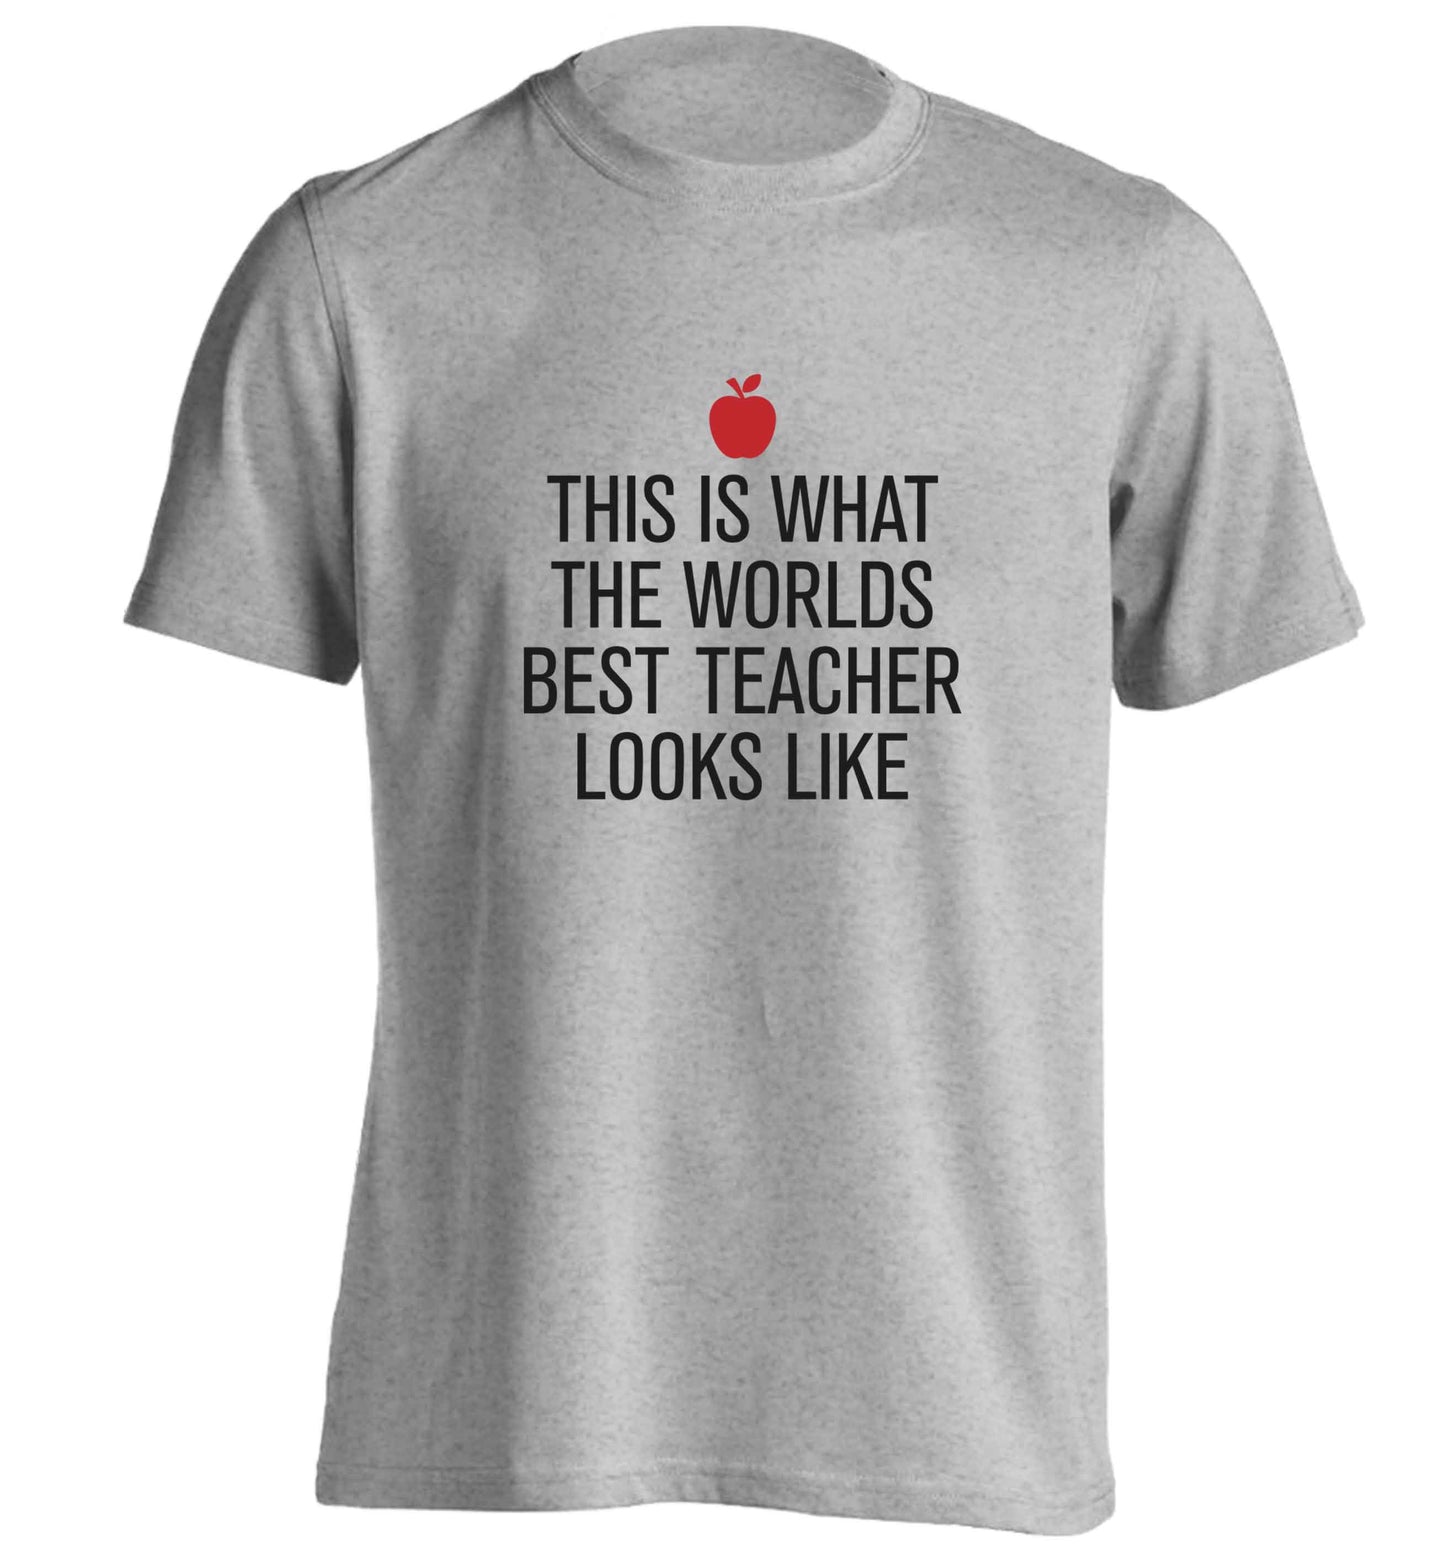 This is what the worlds best teacher looks like adults unisex grey Tshirt 2XL